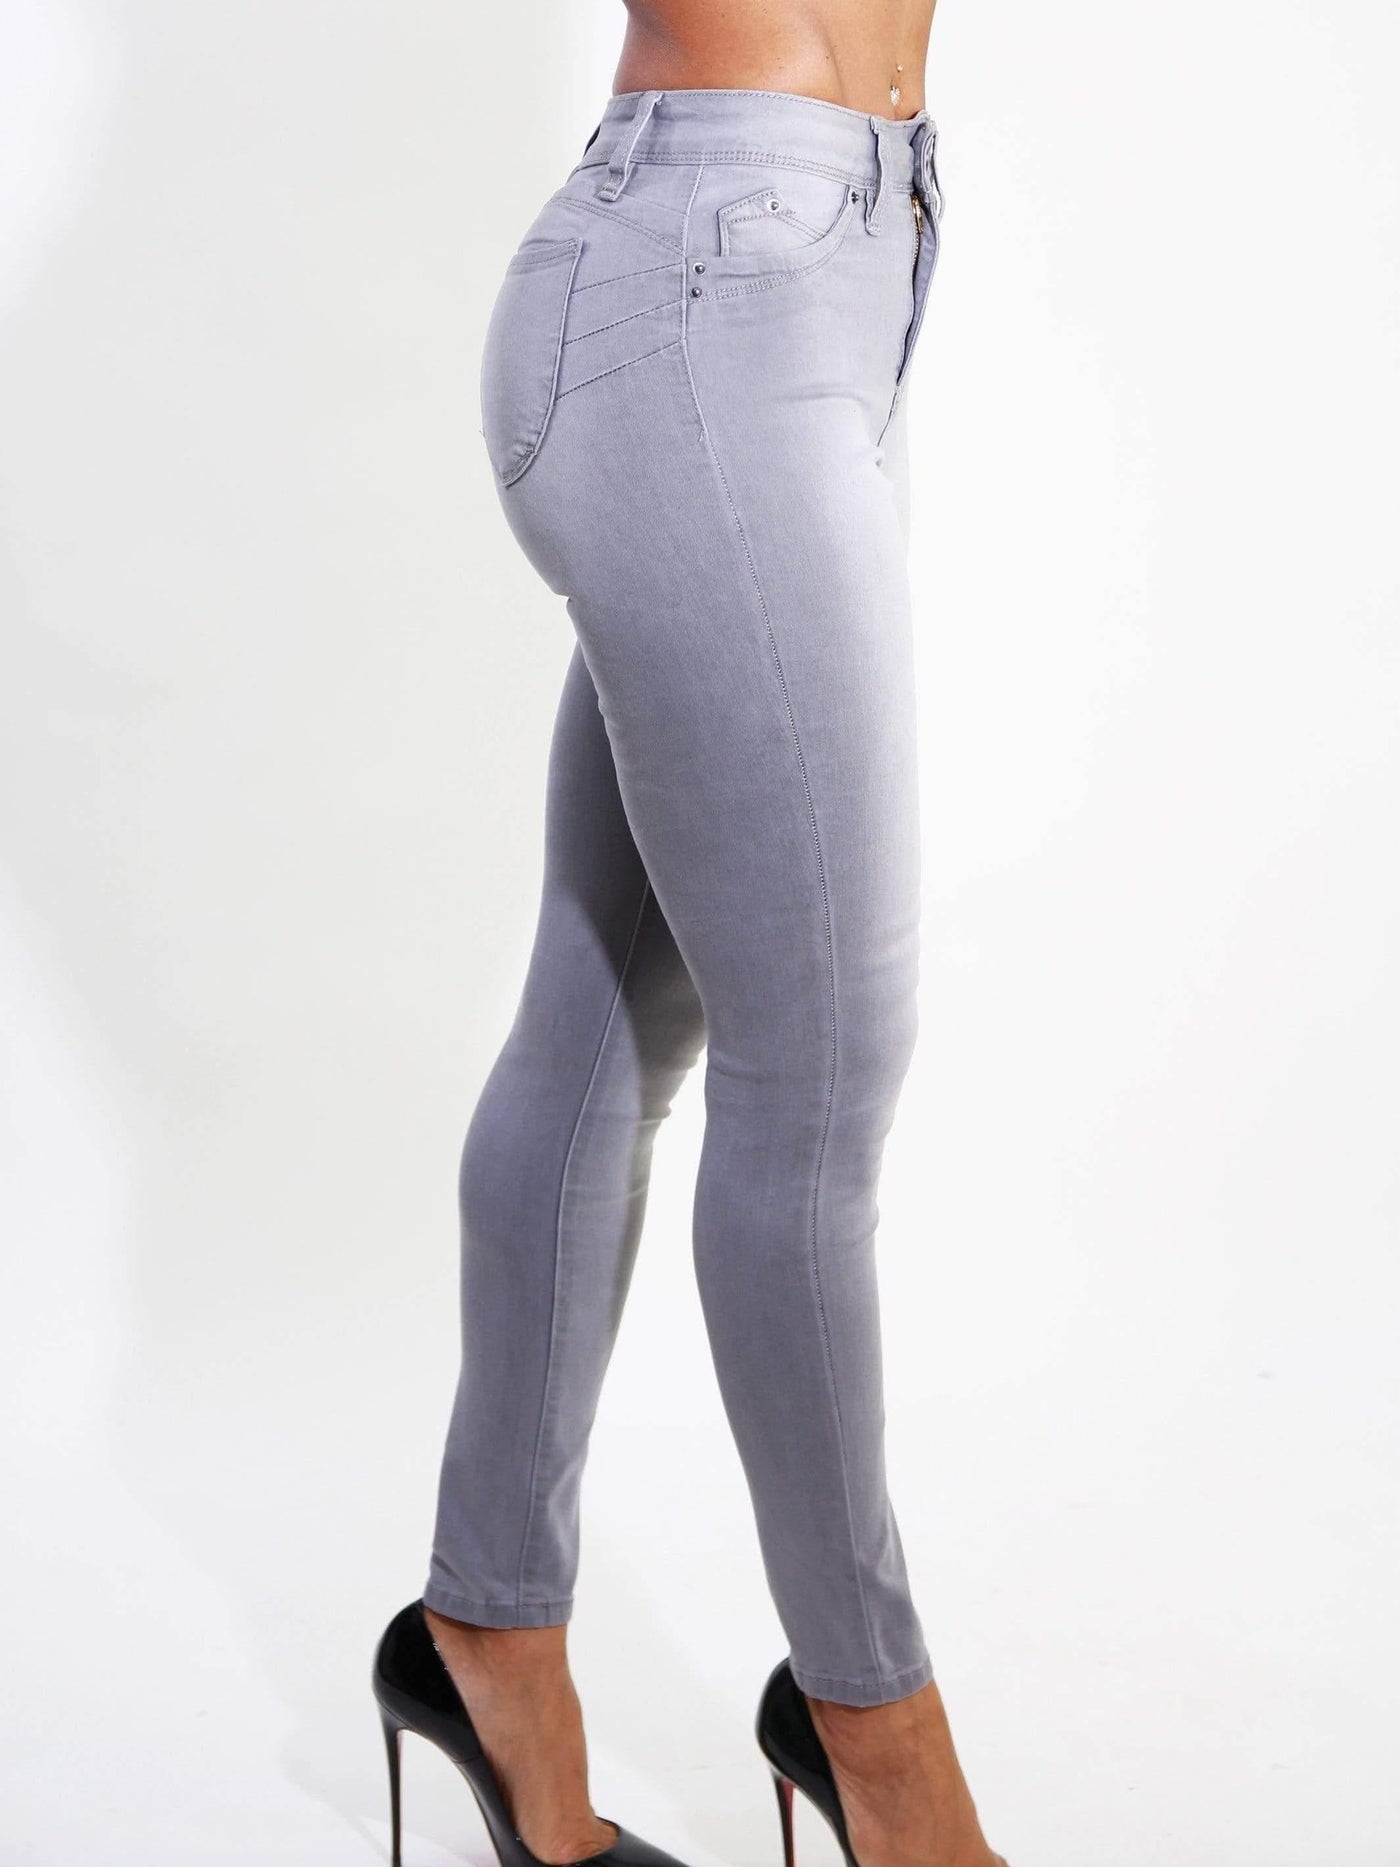 Lift Work | Skinny Fit Jeans - Statement Piece NY _tab_size-chart, Black, Blossom 2021, Blue, Bottoms, Brooklyn Boutique, Denim, Fall, Fall Fashion, Grey, Grey denim, High Waisted, high waisted pants, Long Pants, Misses, Monochrome, Skinny Fit, skinny pants, Standard Fall, statement, statement bottom, statement bottoms, Statement Clothing, statement piece, Statement Piece Boutique, statement piece ny, Statement Pieces, Statement Pieces Boutique, Women's Boutique, XL Statement Bottoms